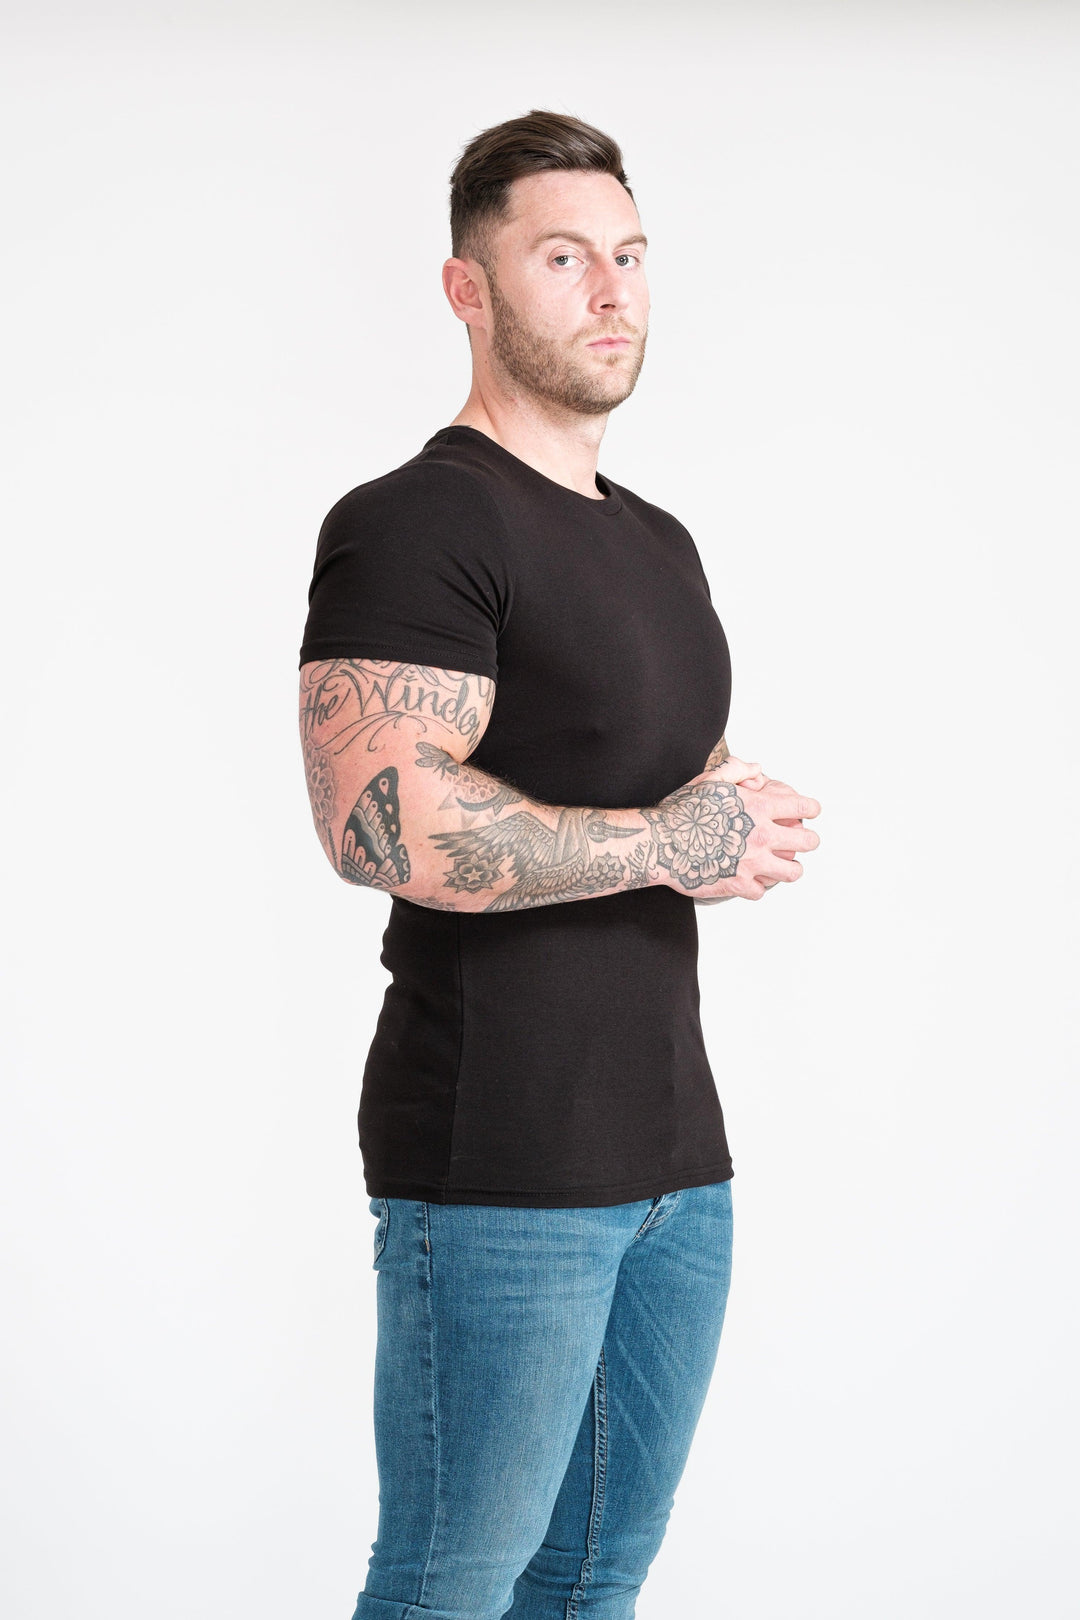 Mens Black Muscle Fit T-Shirt. A Proportionally Fitted and Muscle Fit T Shirt. Ideal for muscular guys.